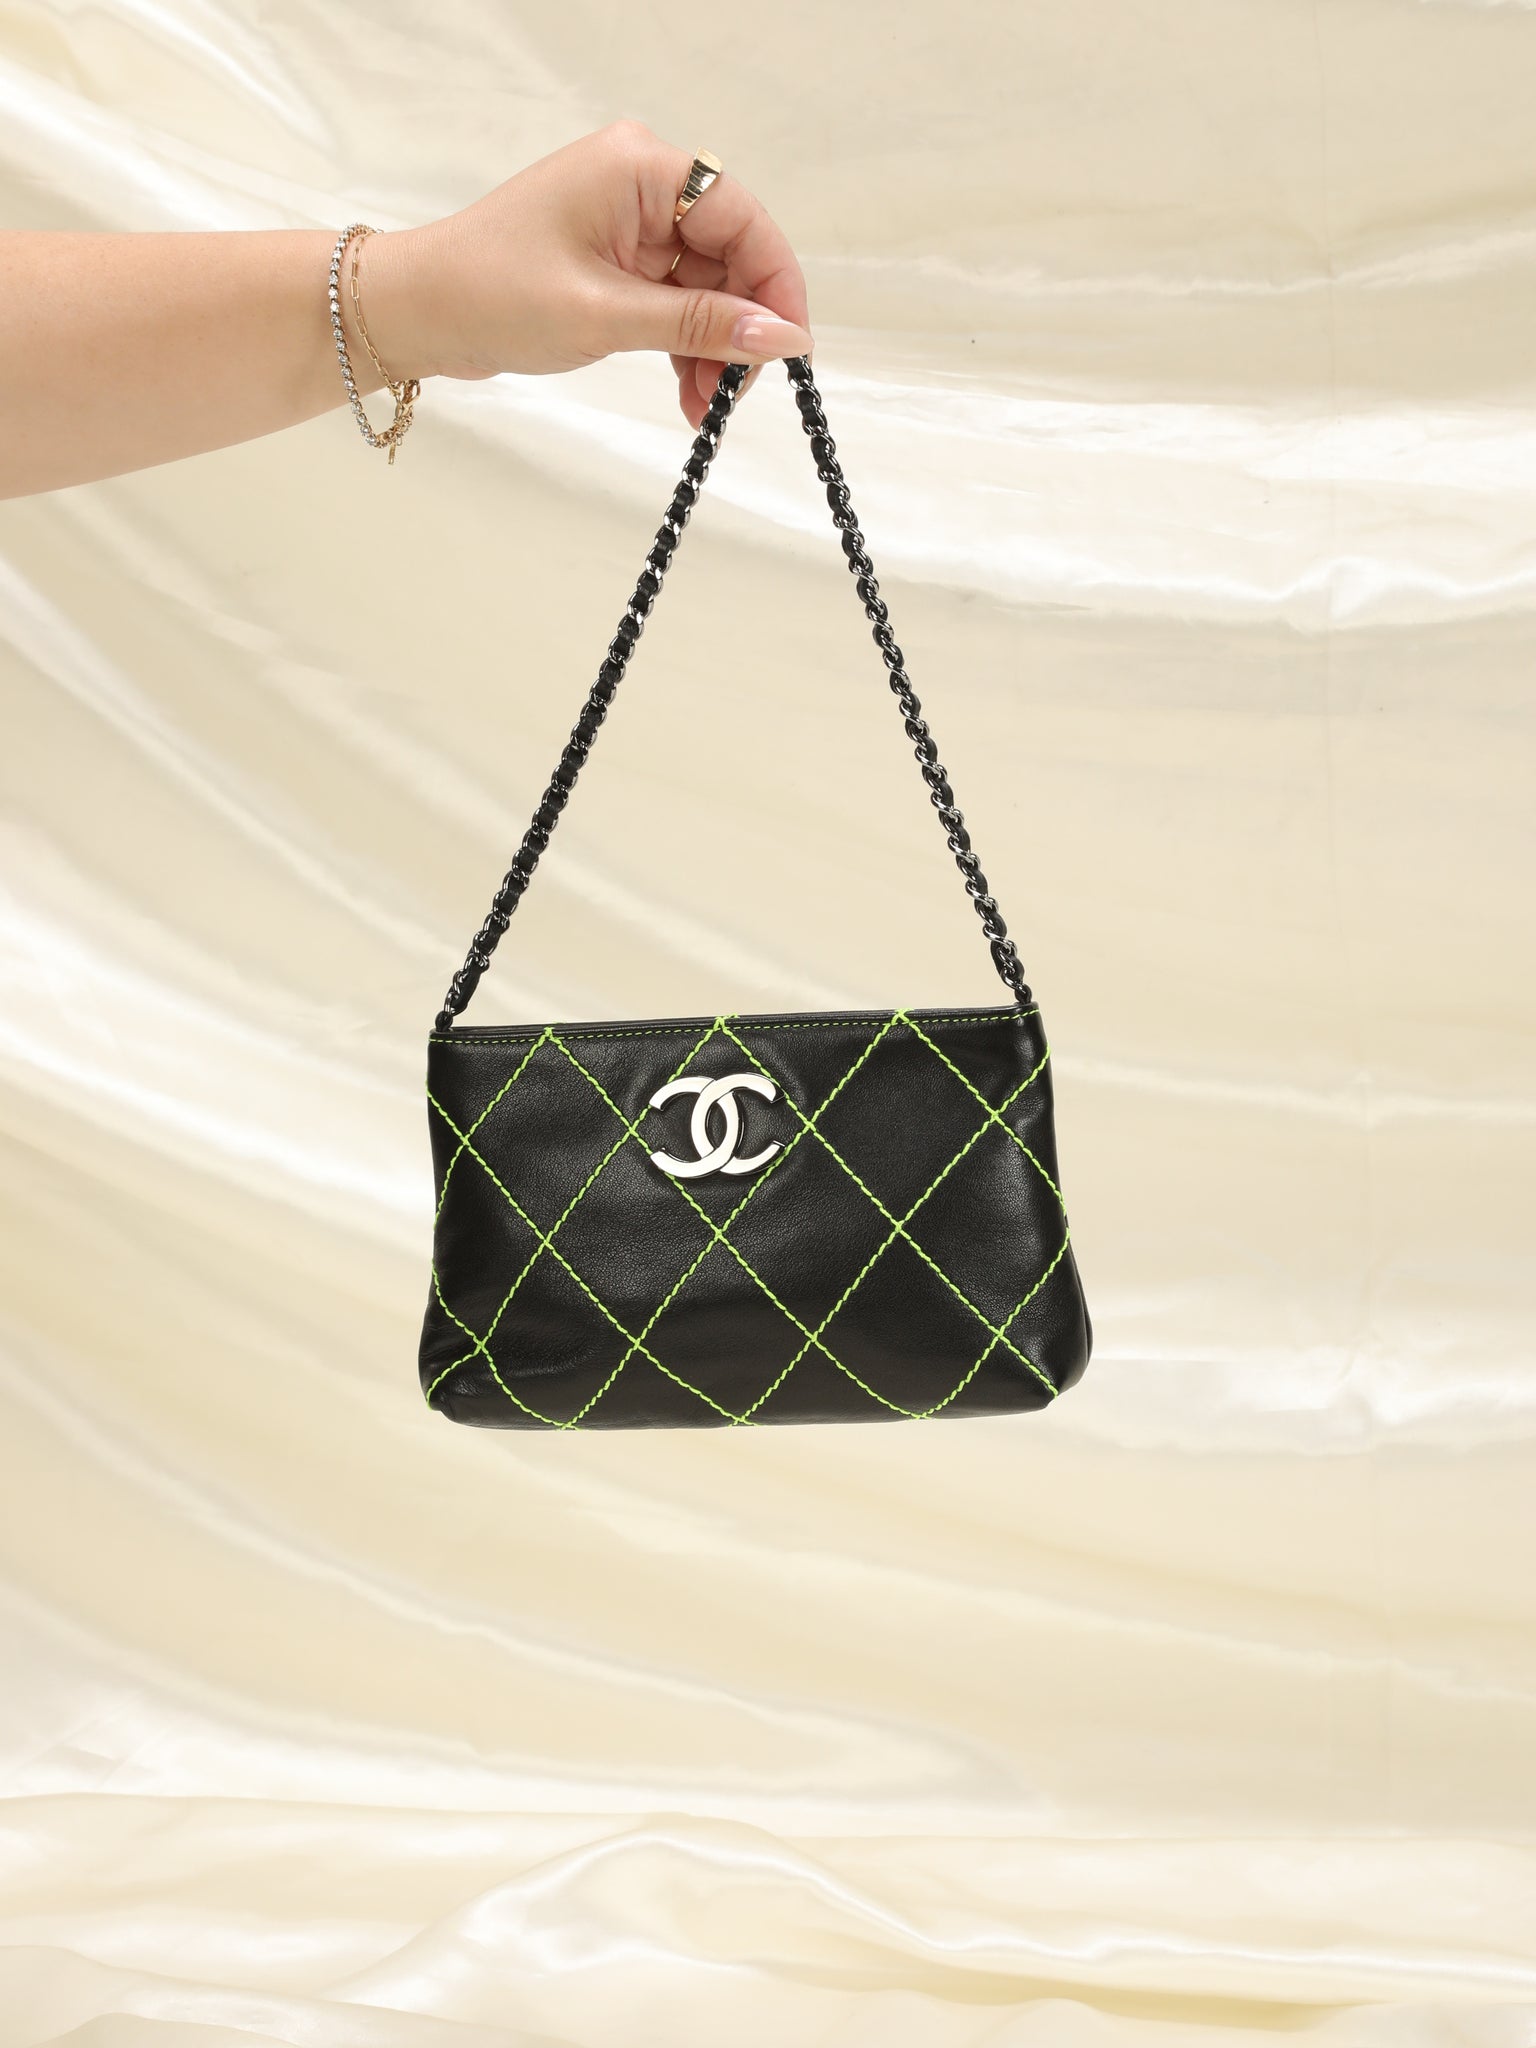 chanel small leather goods crossbody